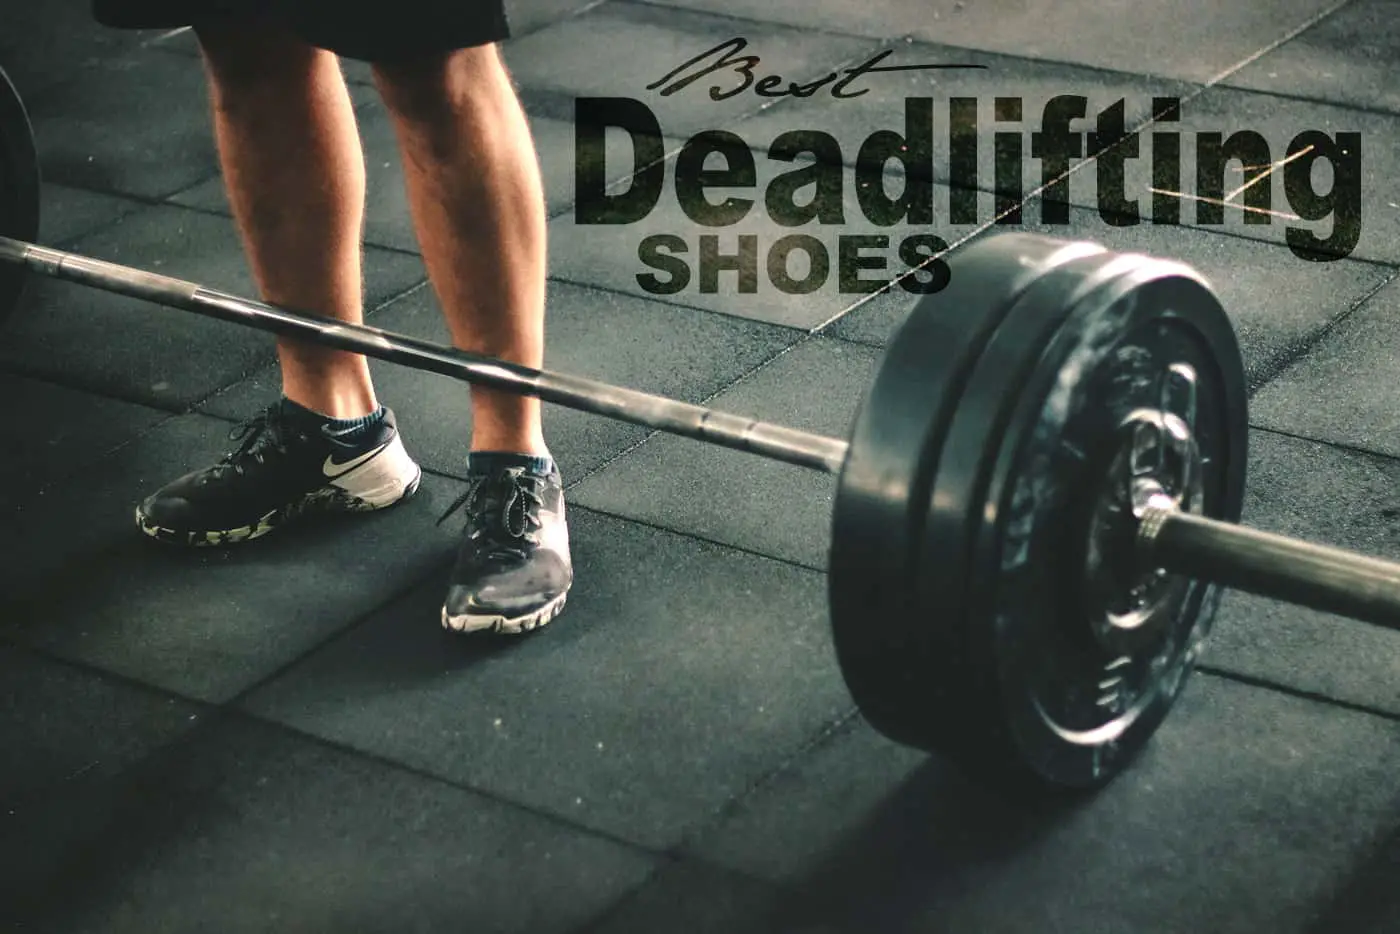 The 11 Best Deadlifting Shoes for 2021 